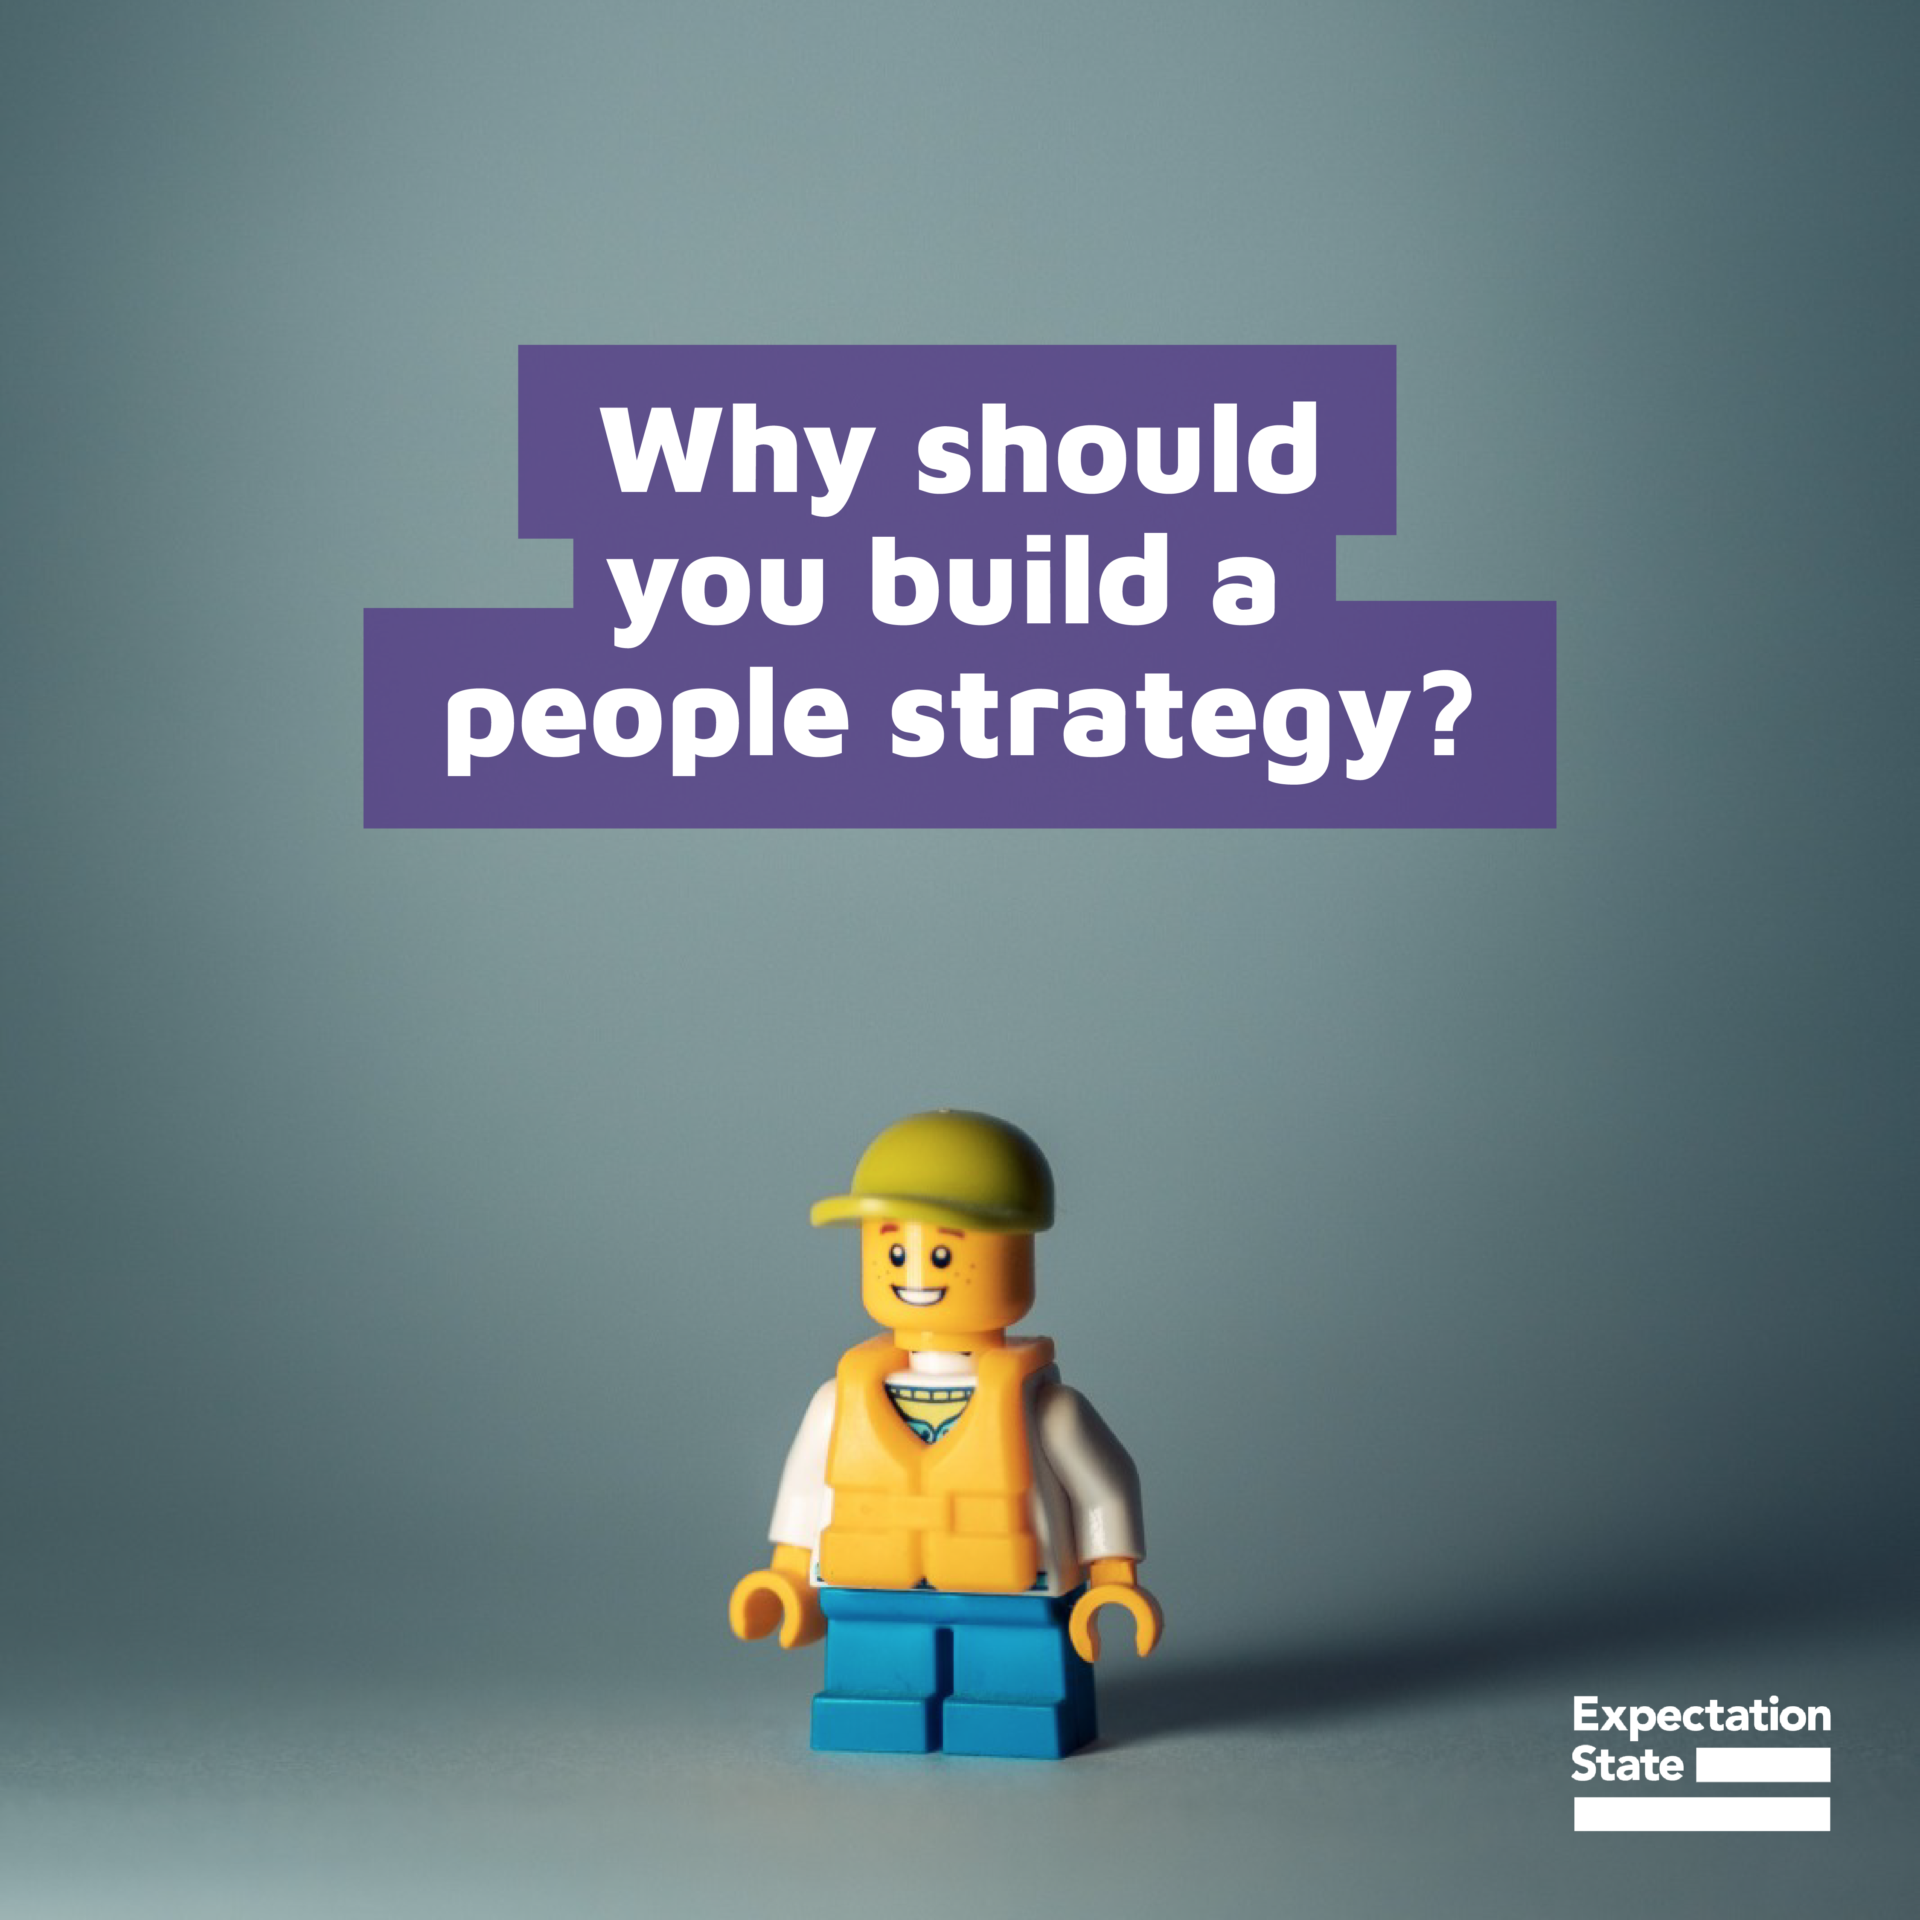 Why should you build a people strategy?